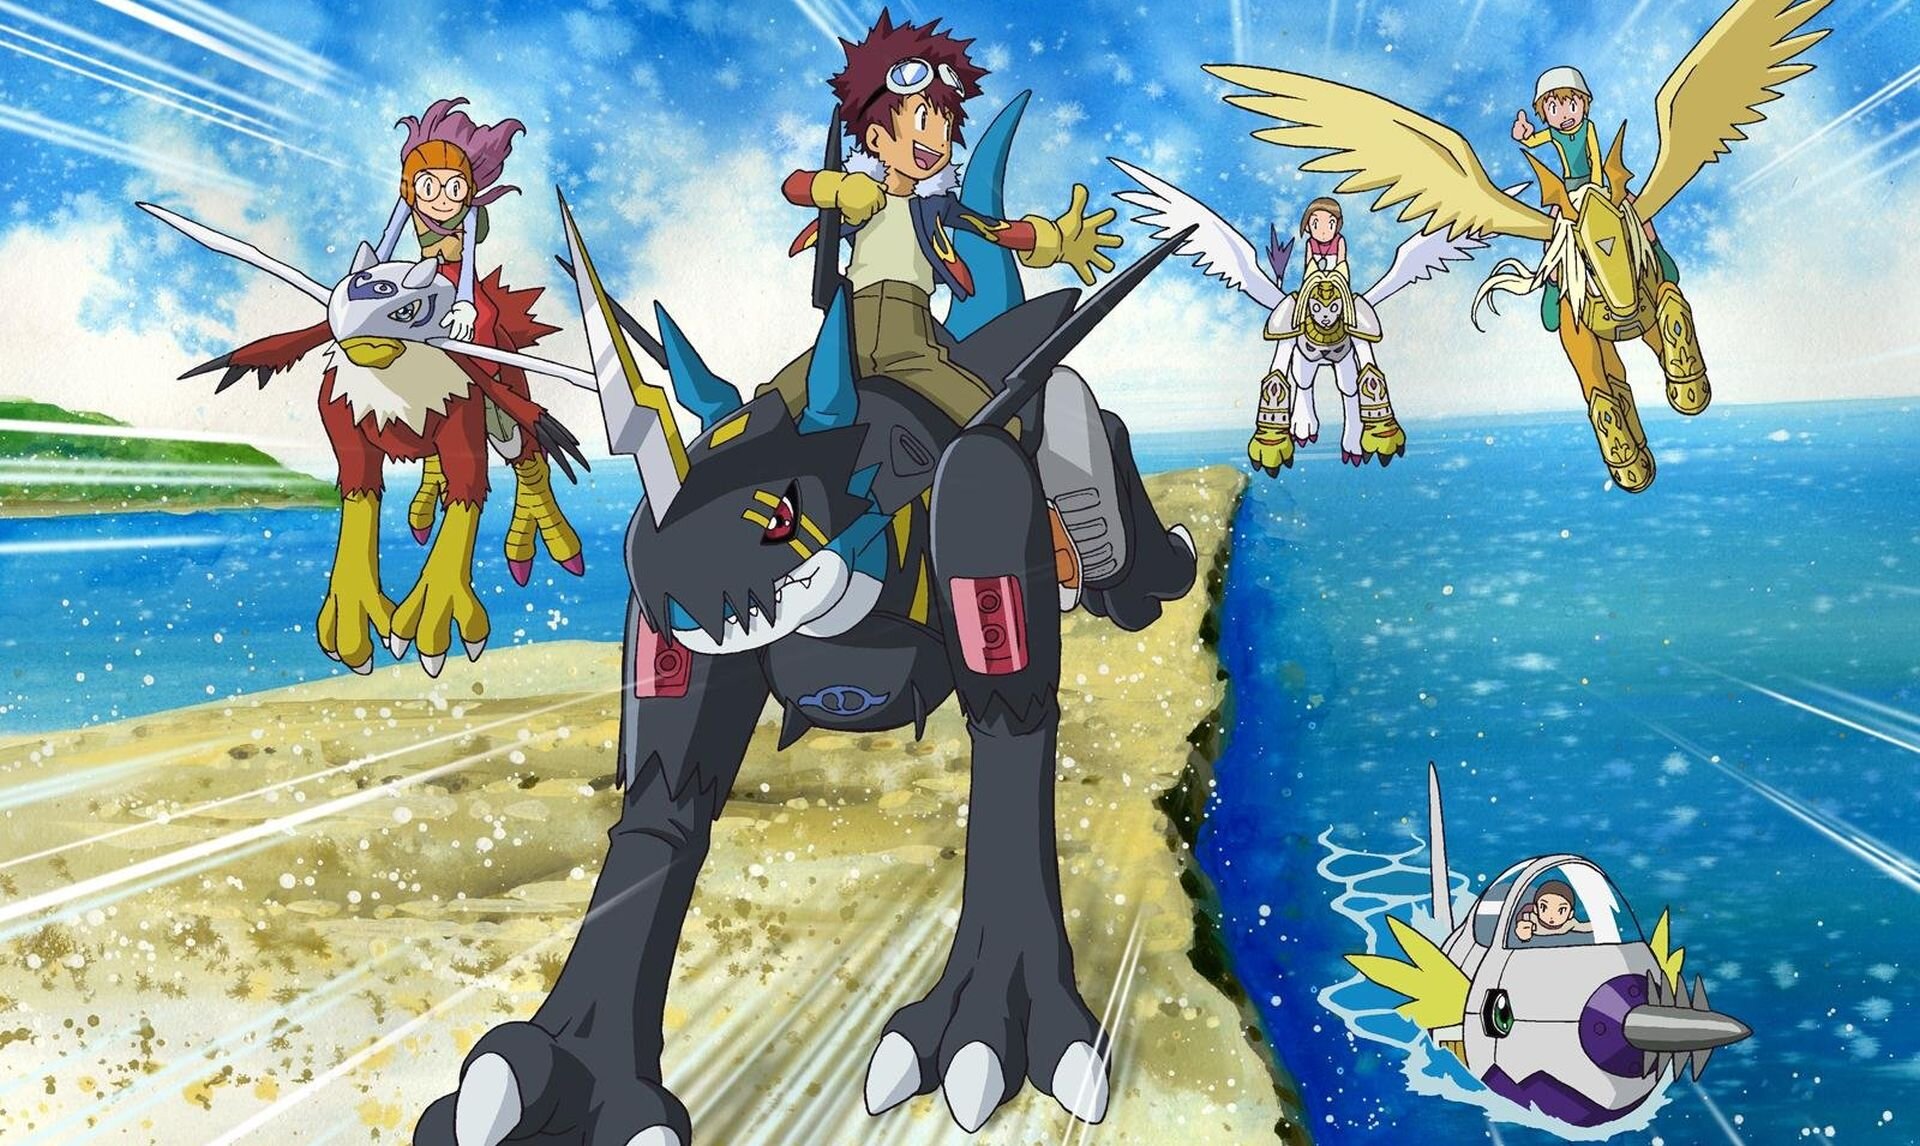 DIGIMON ADVENTURES 02 is a Fun Sequel with Awesome Ideas and Wandering Narrative